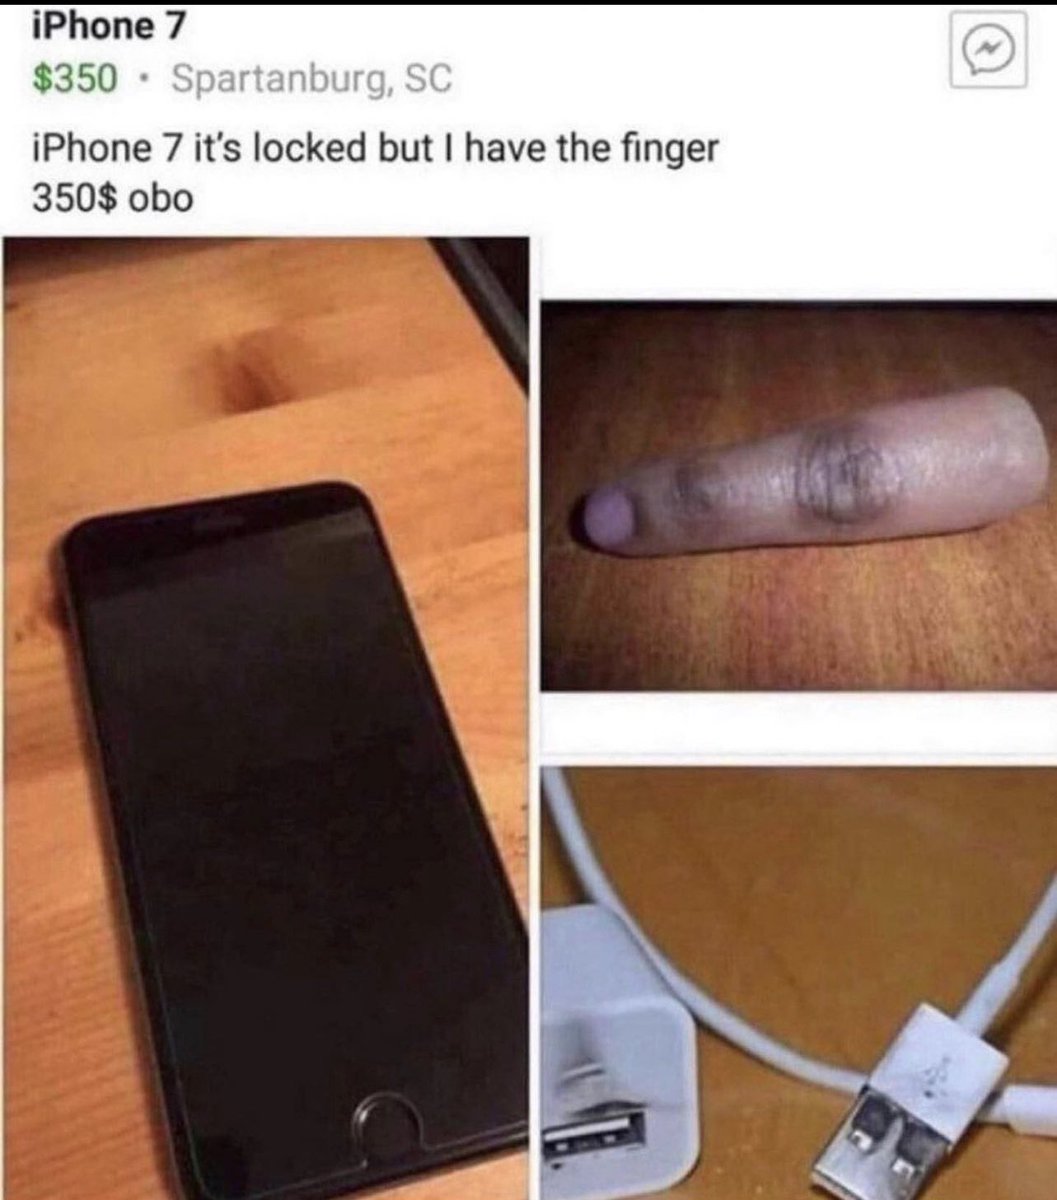 the best of bizarre content - iphone locked but i have the finger - iPhone 7 $350 Spartanburg, Sc iPhone 7 it's locked but I have the finger 350$ obo